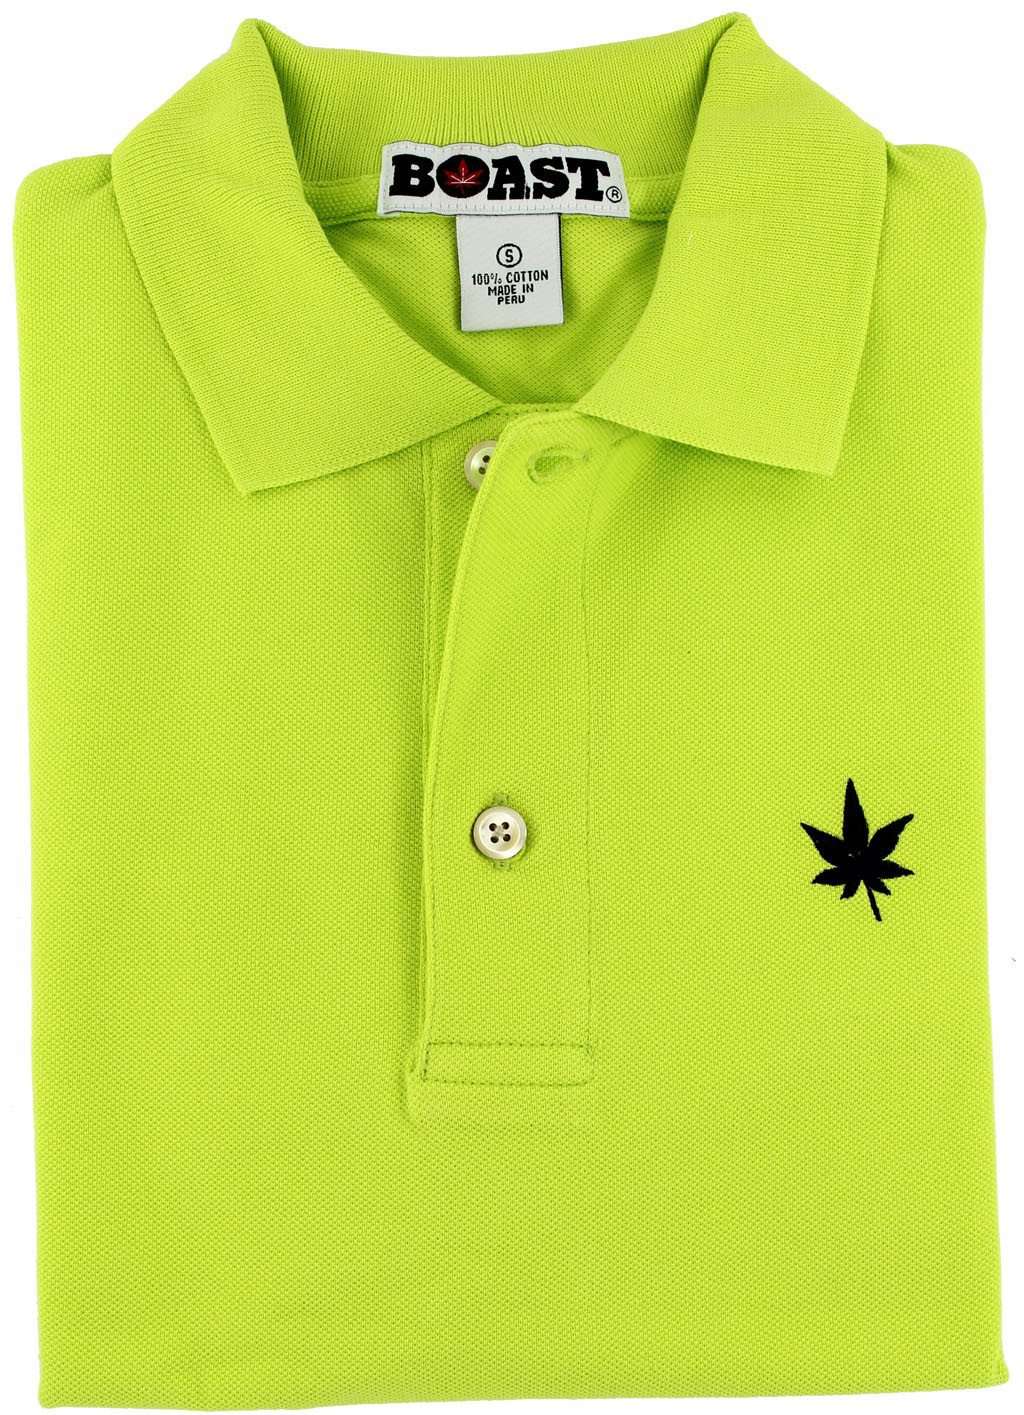 Limited Edition Classic Polo in Tennis Ball Yellow by Boast - Country Club Prep